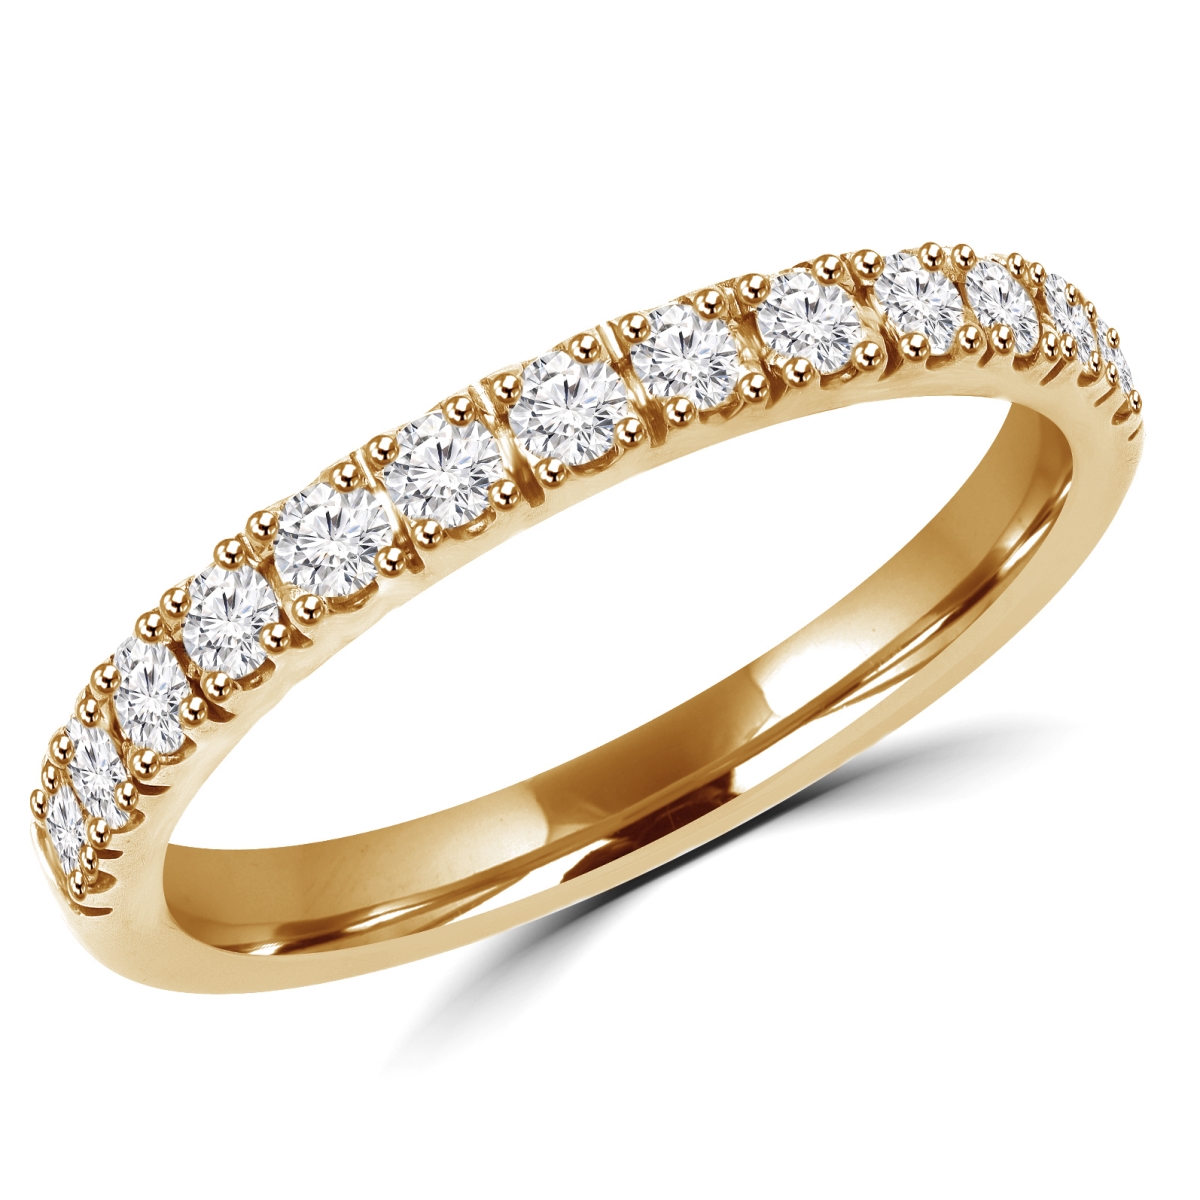 Picture of Majesty Diamonds MD180187-7.75 0.3 CTW Round Diamond Semi-Eternity Wedding Band Ring in 14K Yellow Gold - Size 7.75